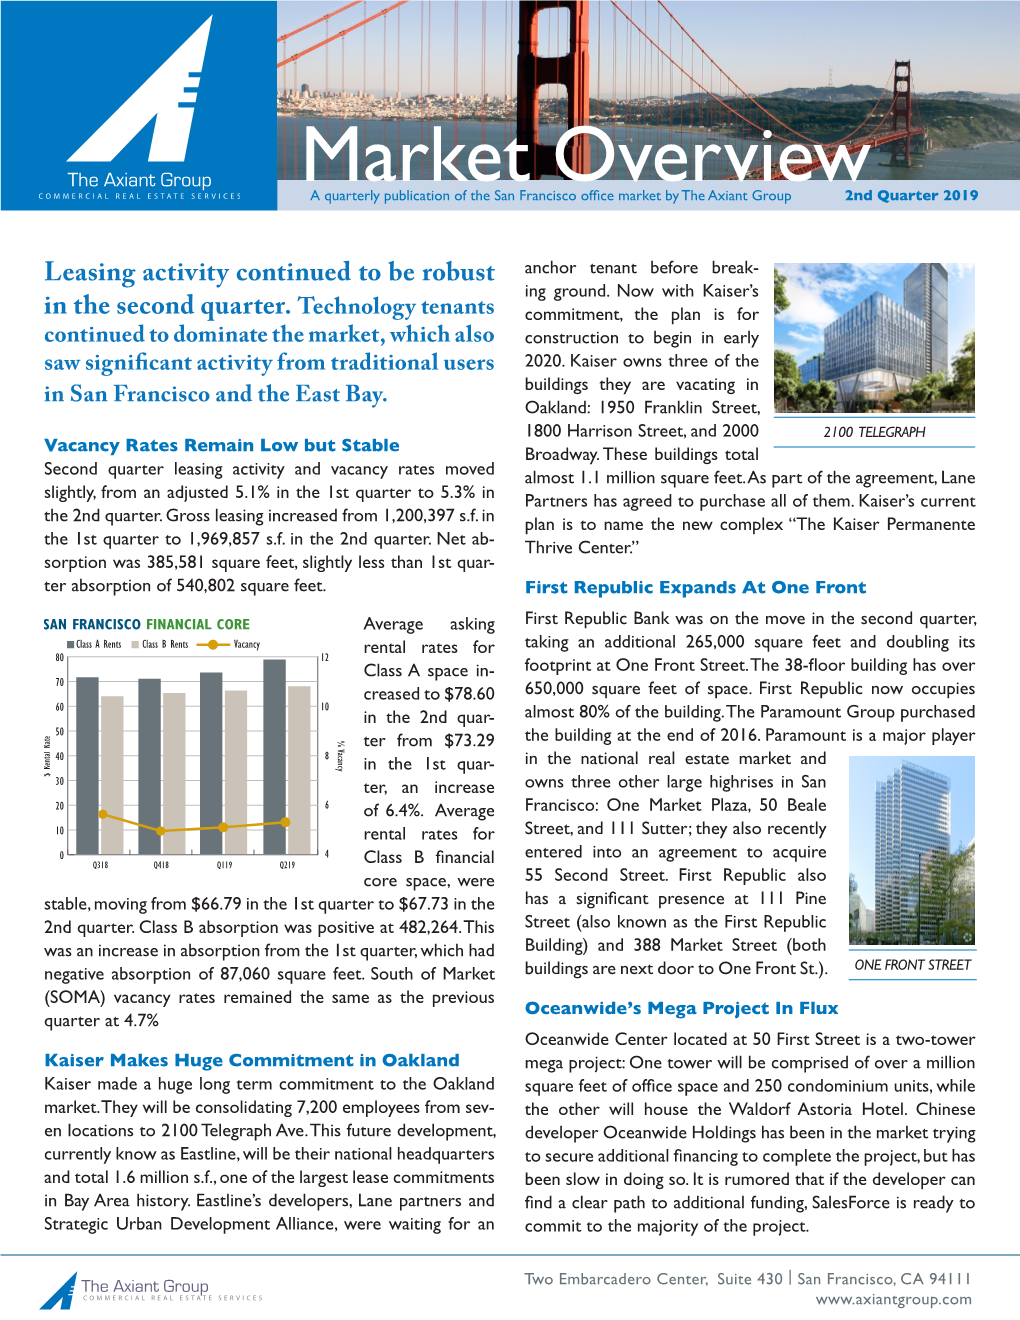 Market Overview a Quarterly Publication of the San Francisco Office Market by the Axiant Group 2Nd Quarter 2019